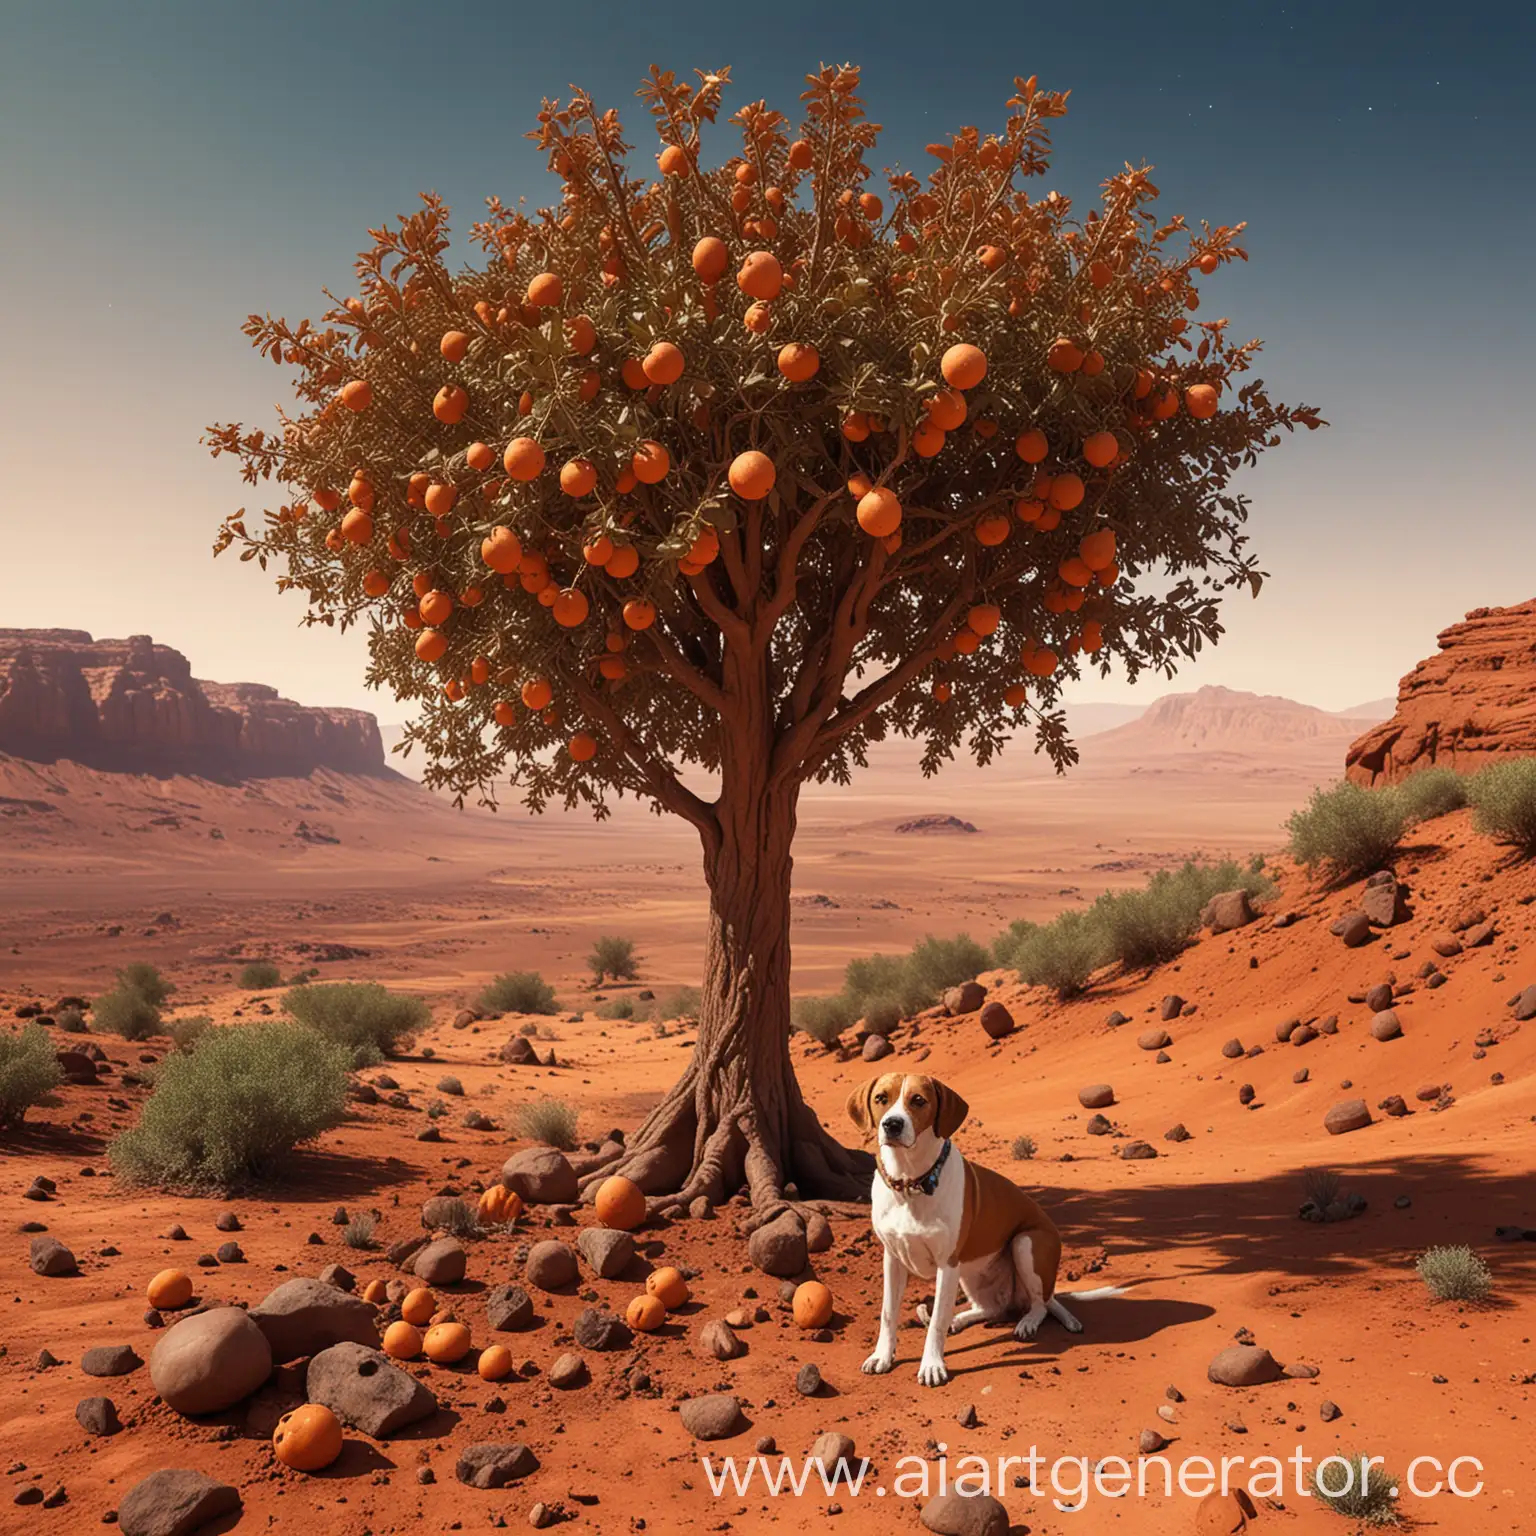 Mars-Crater-Landscape-with-Rocket-Tree-and-Hunting-Dog